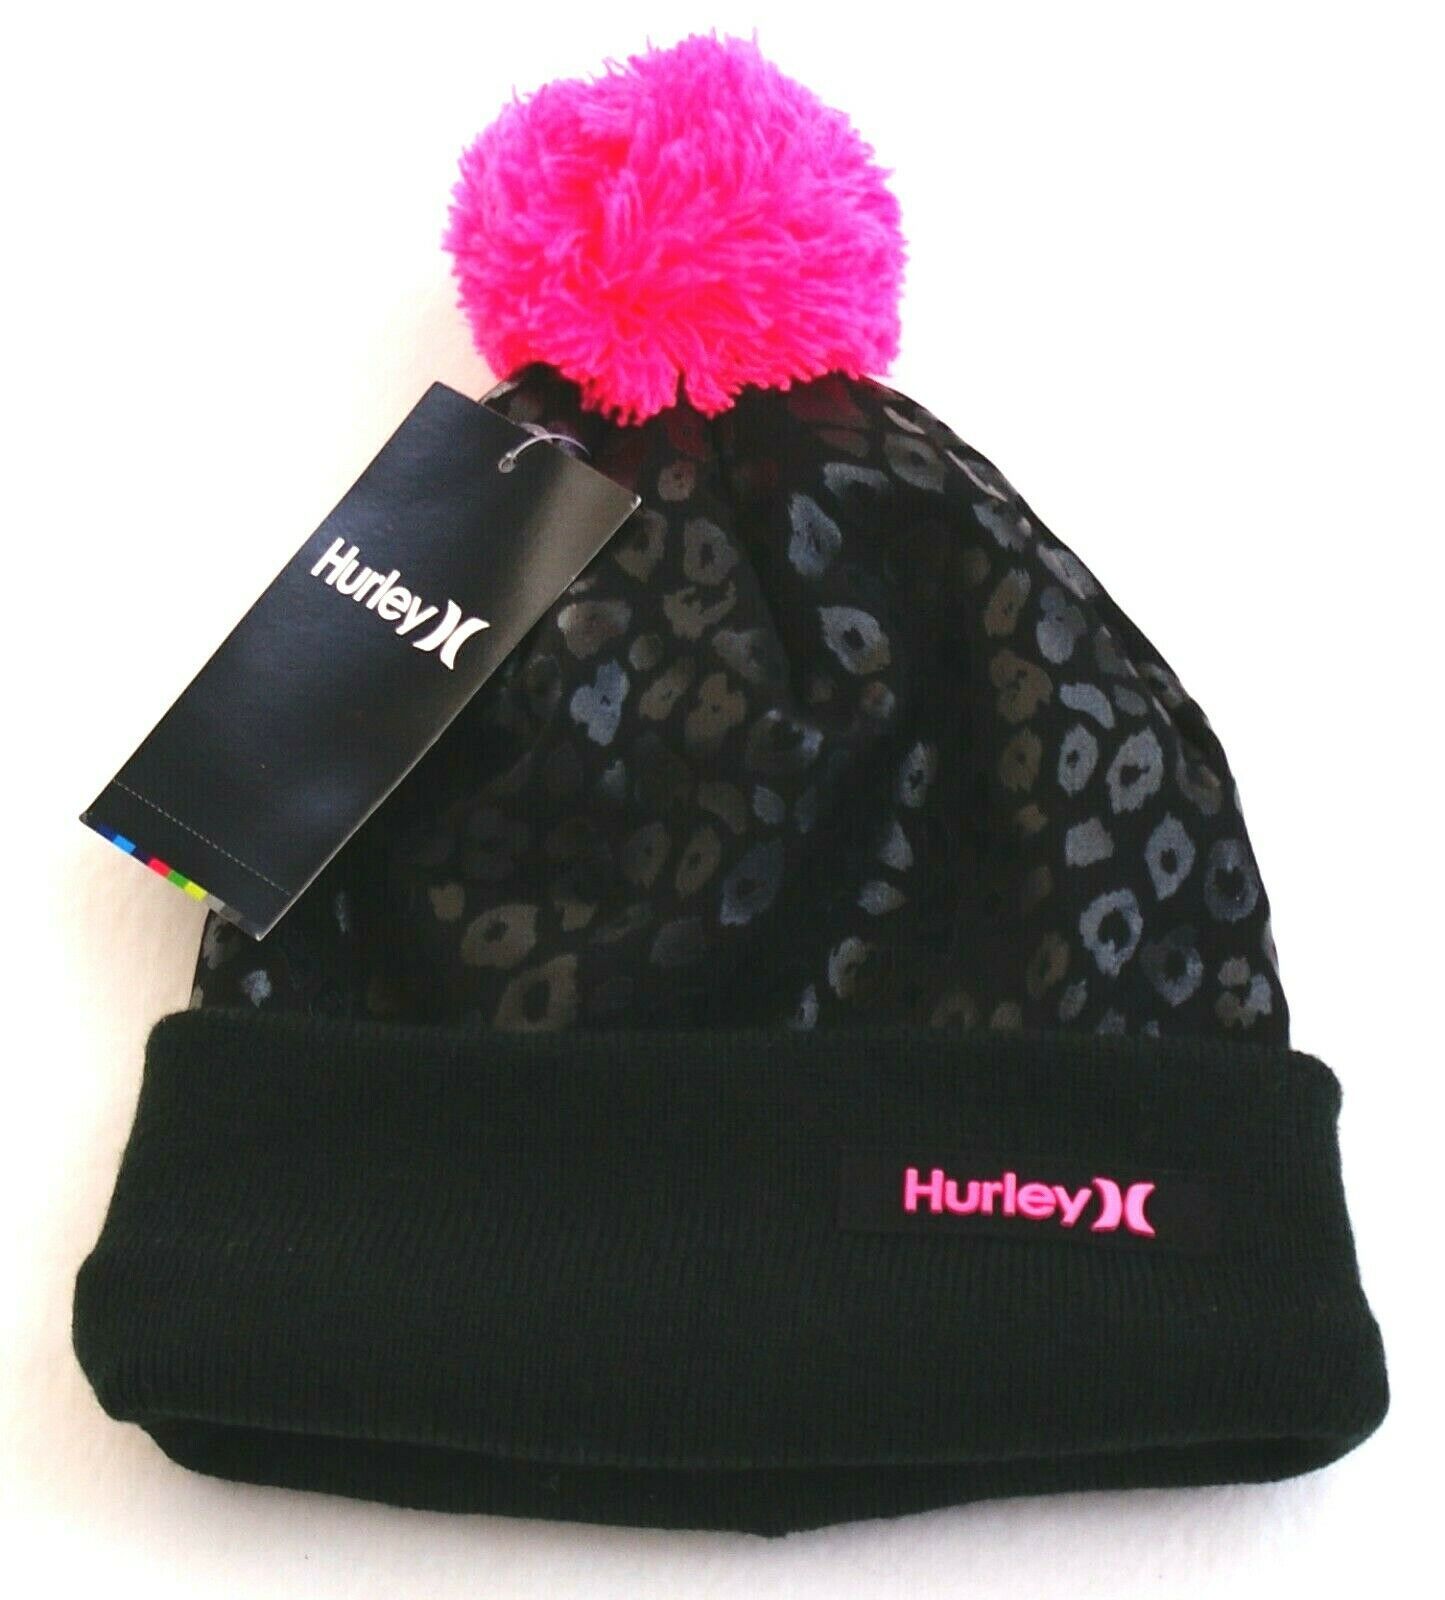 Hurley Black & Pink Knit Cuff Pom Beanie Youth Girl's 7-16 NWT - $25.98